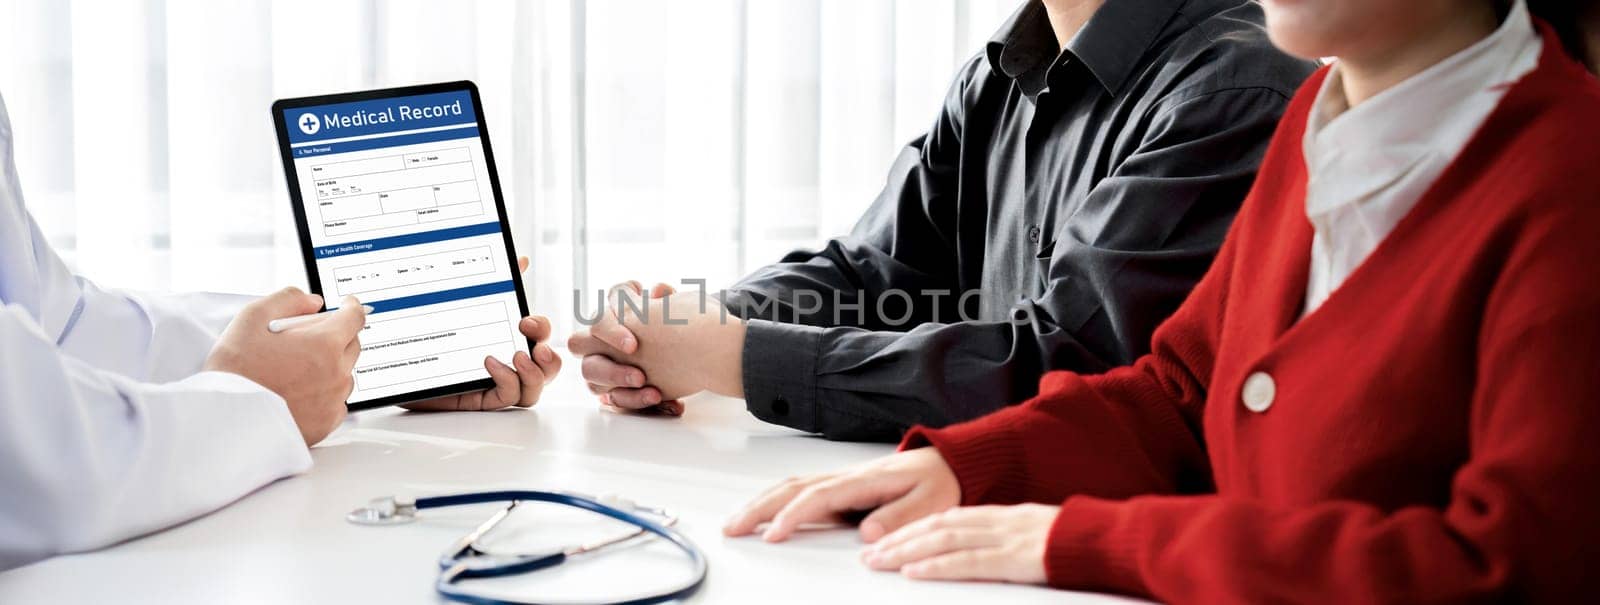 Couple attend fertility consultation with gynecologist at hospital. Rigid by biancoblue